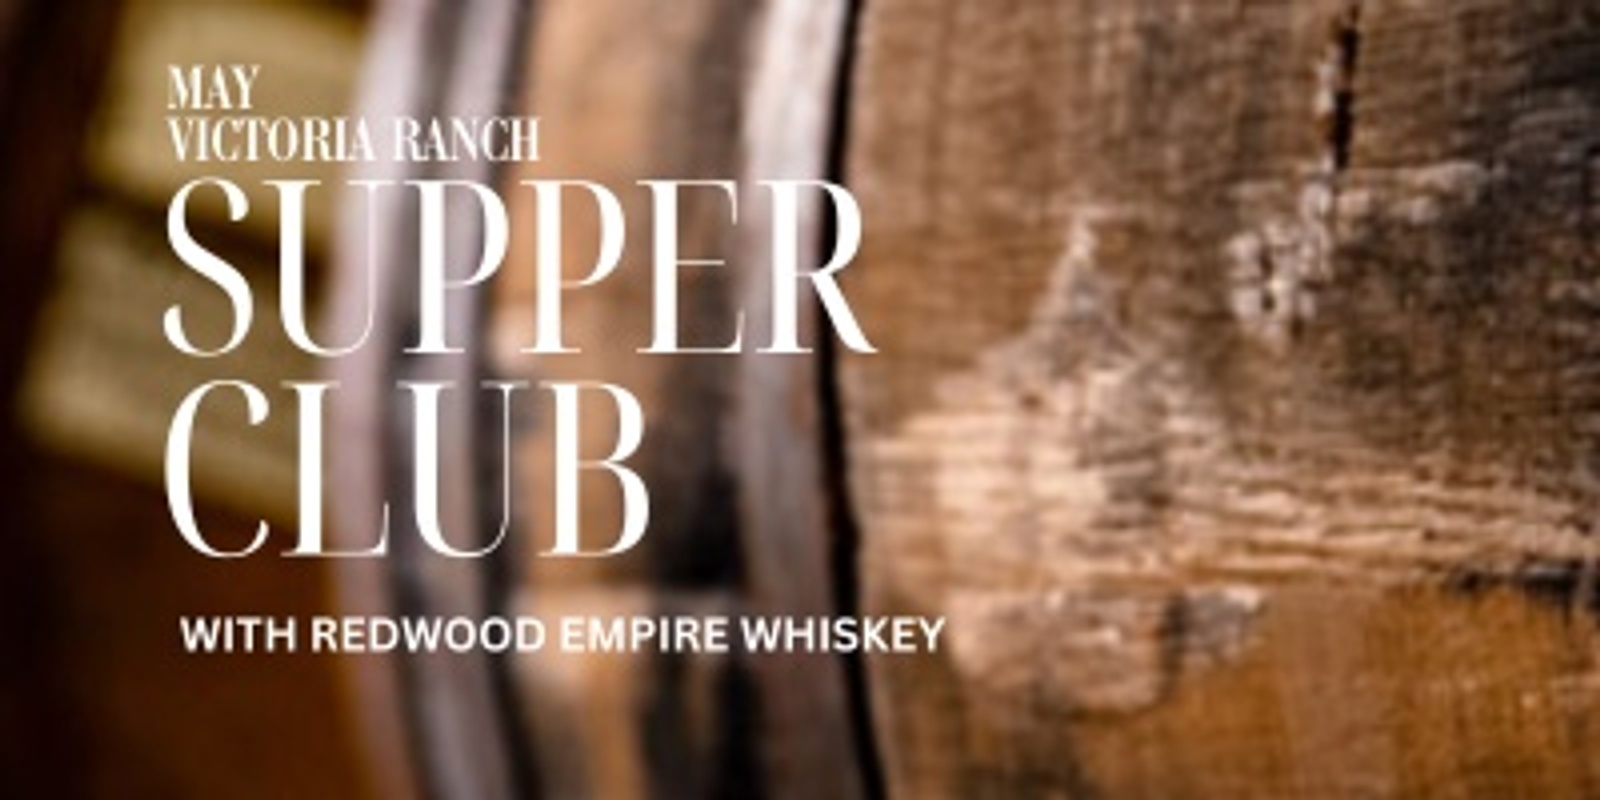 Banner image for Victoria Ranch Supper Club with Redwood Empire Whiskey 